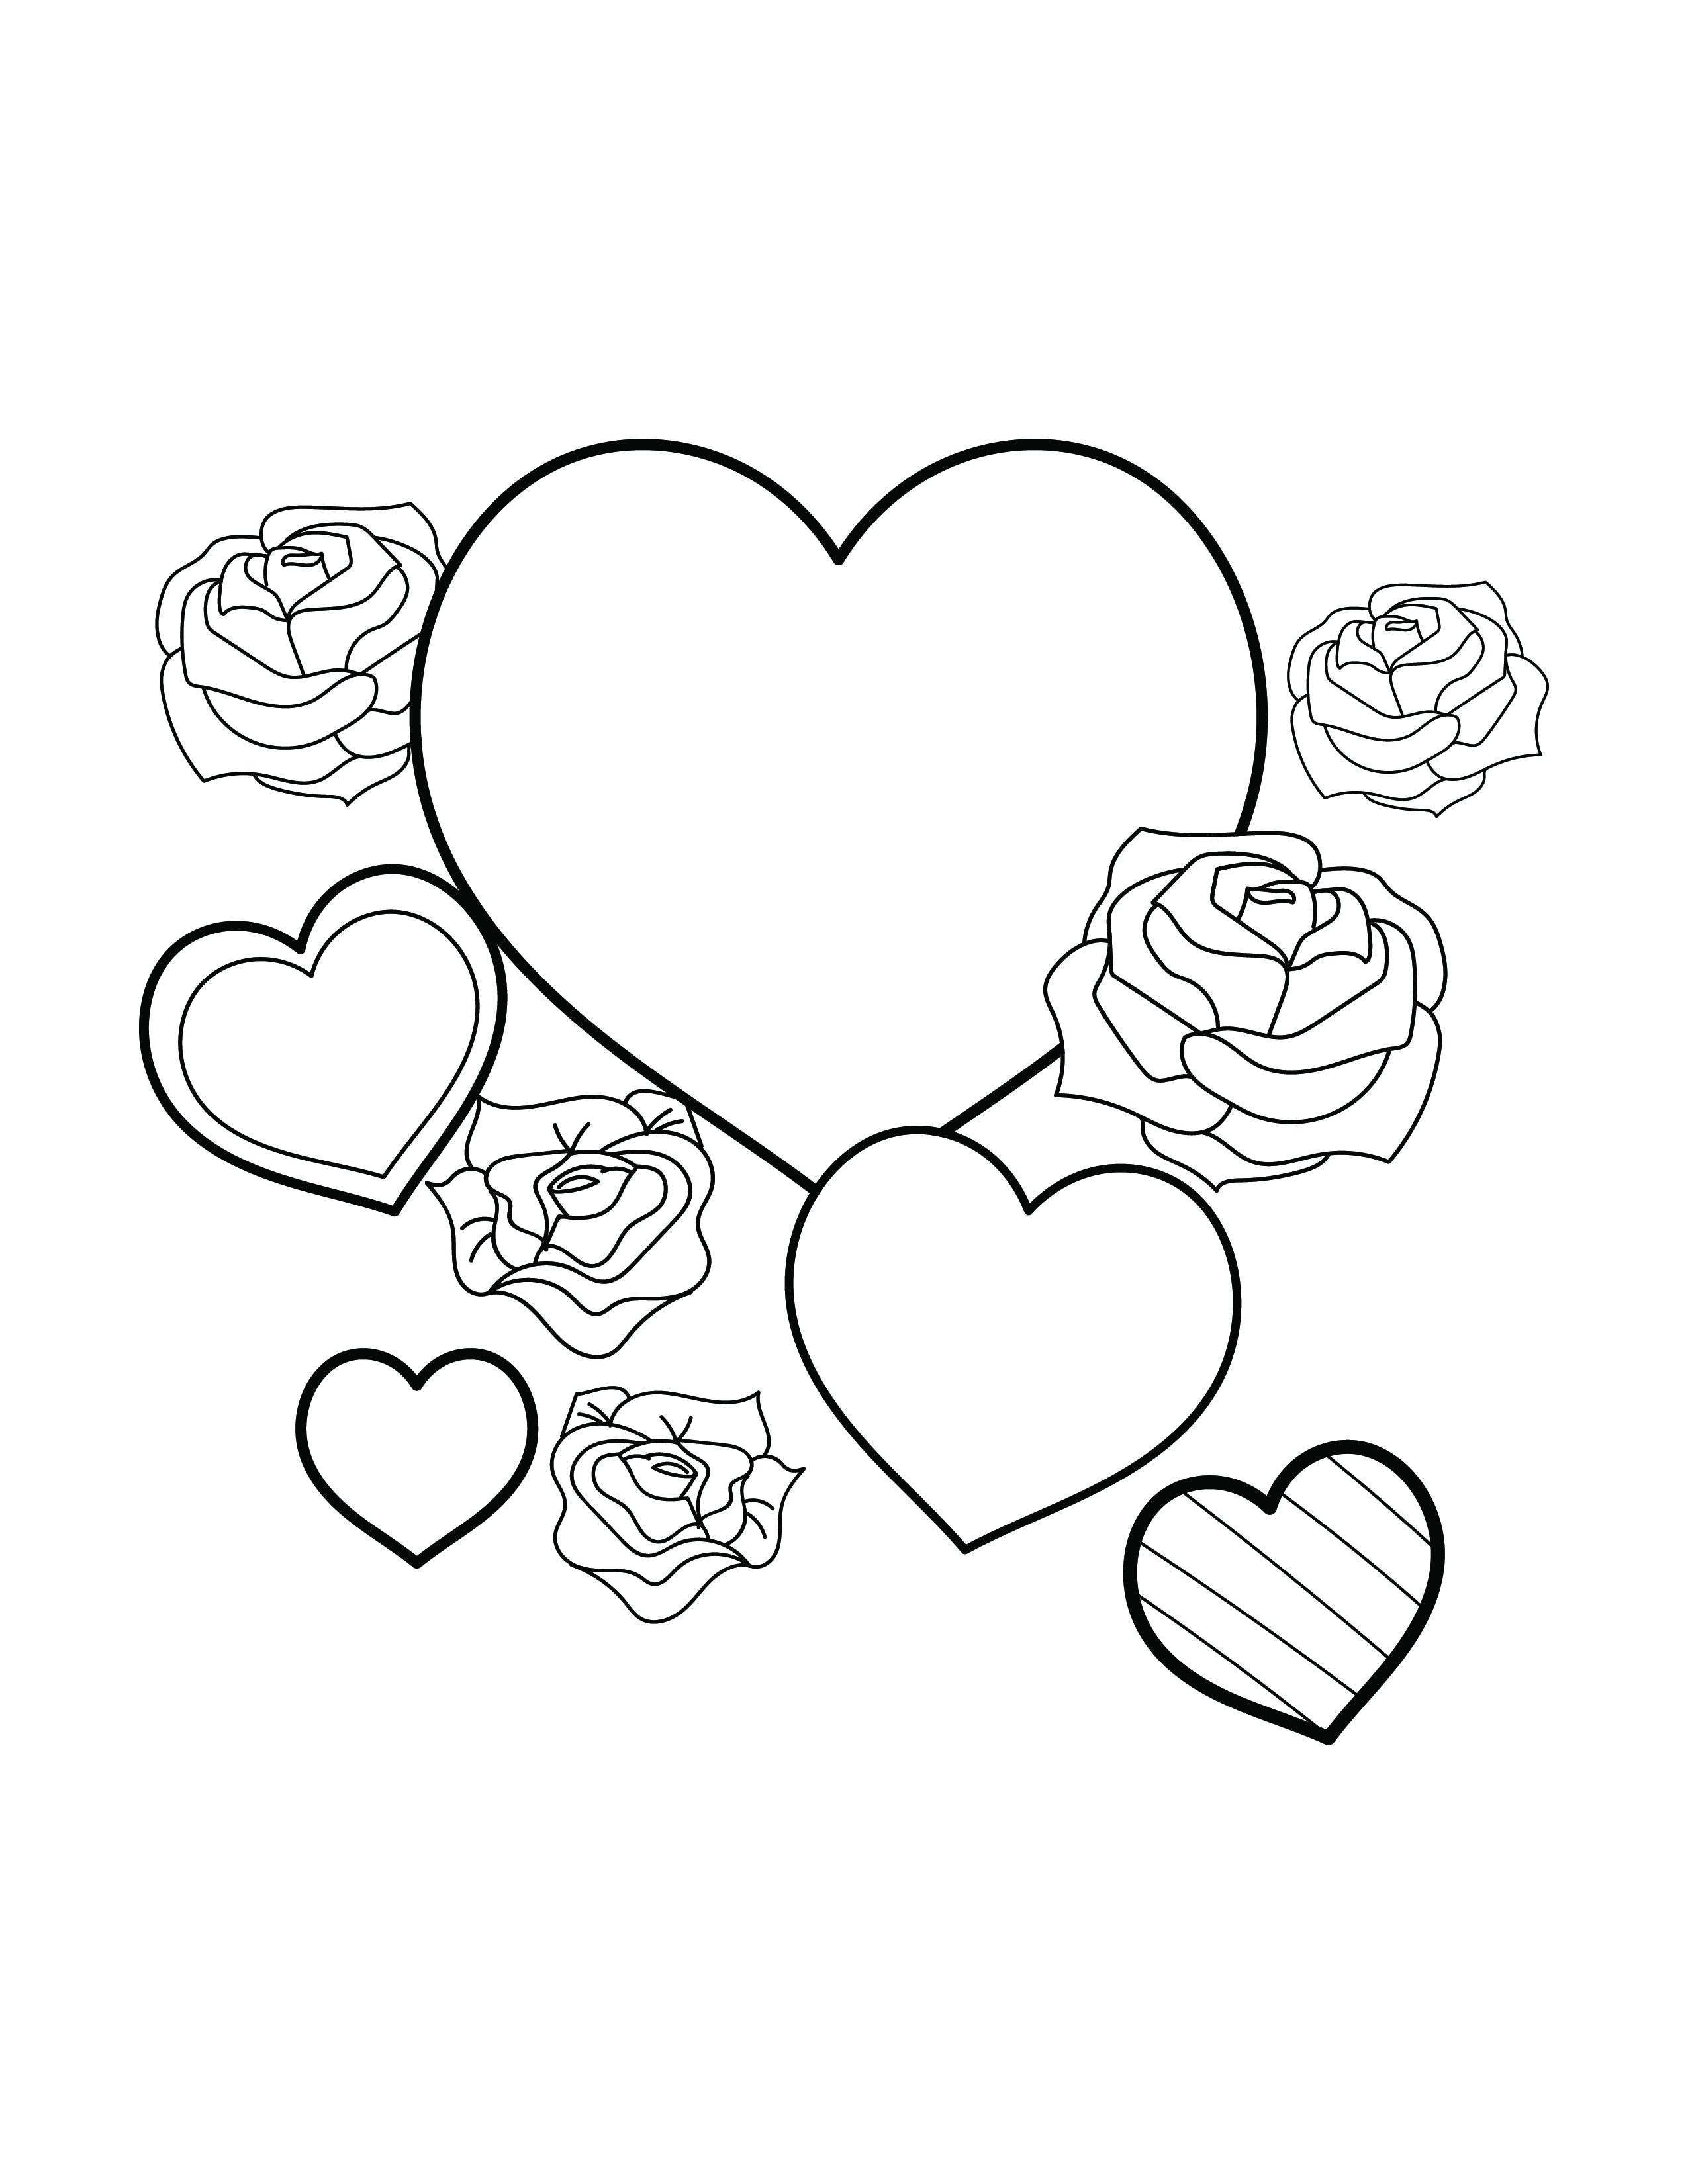 Free Broken Heart and Roses Coloring Page - Download in PDF ...